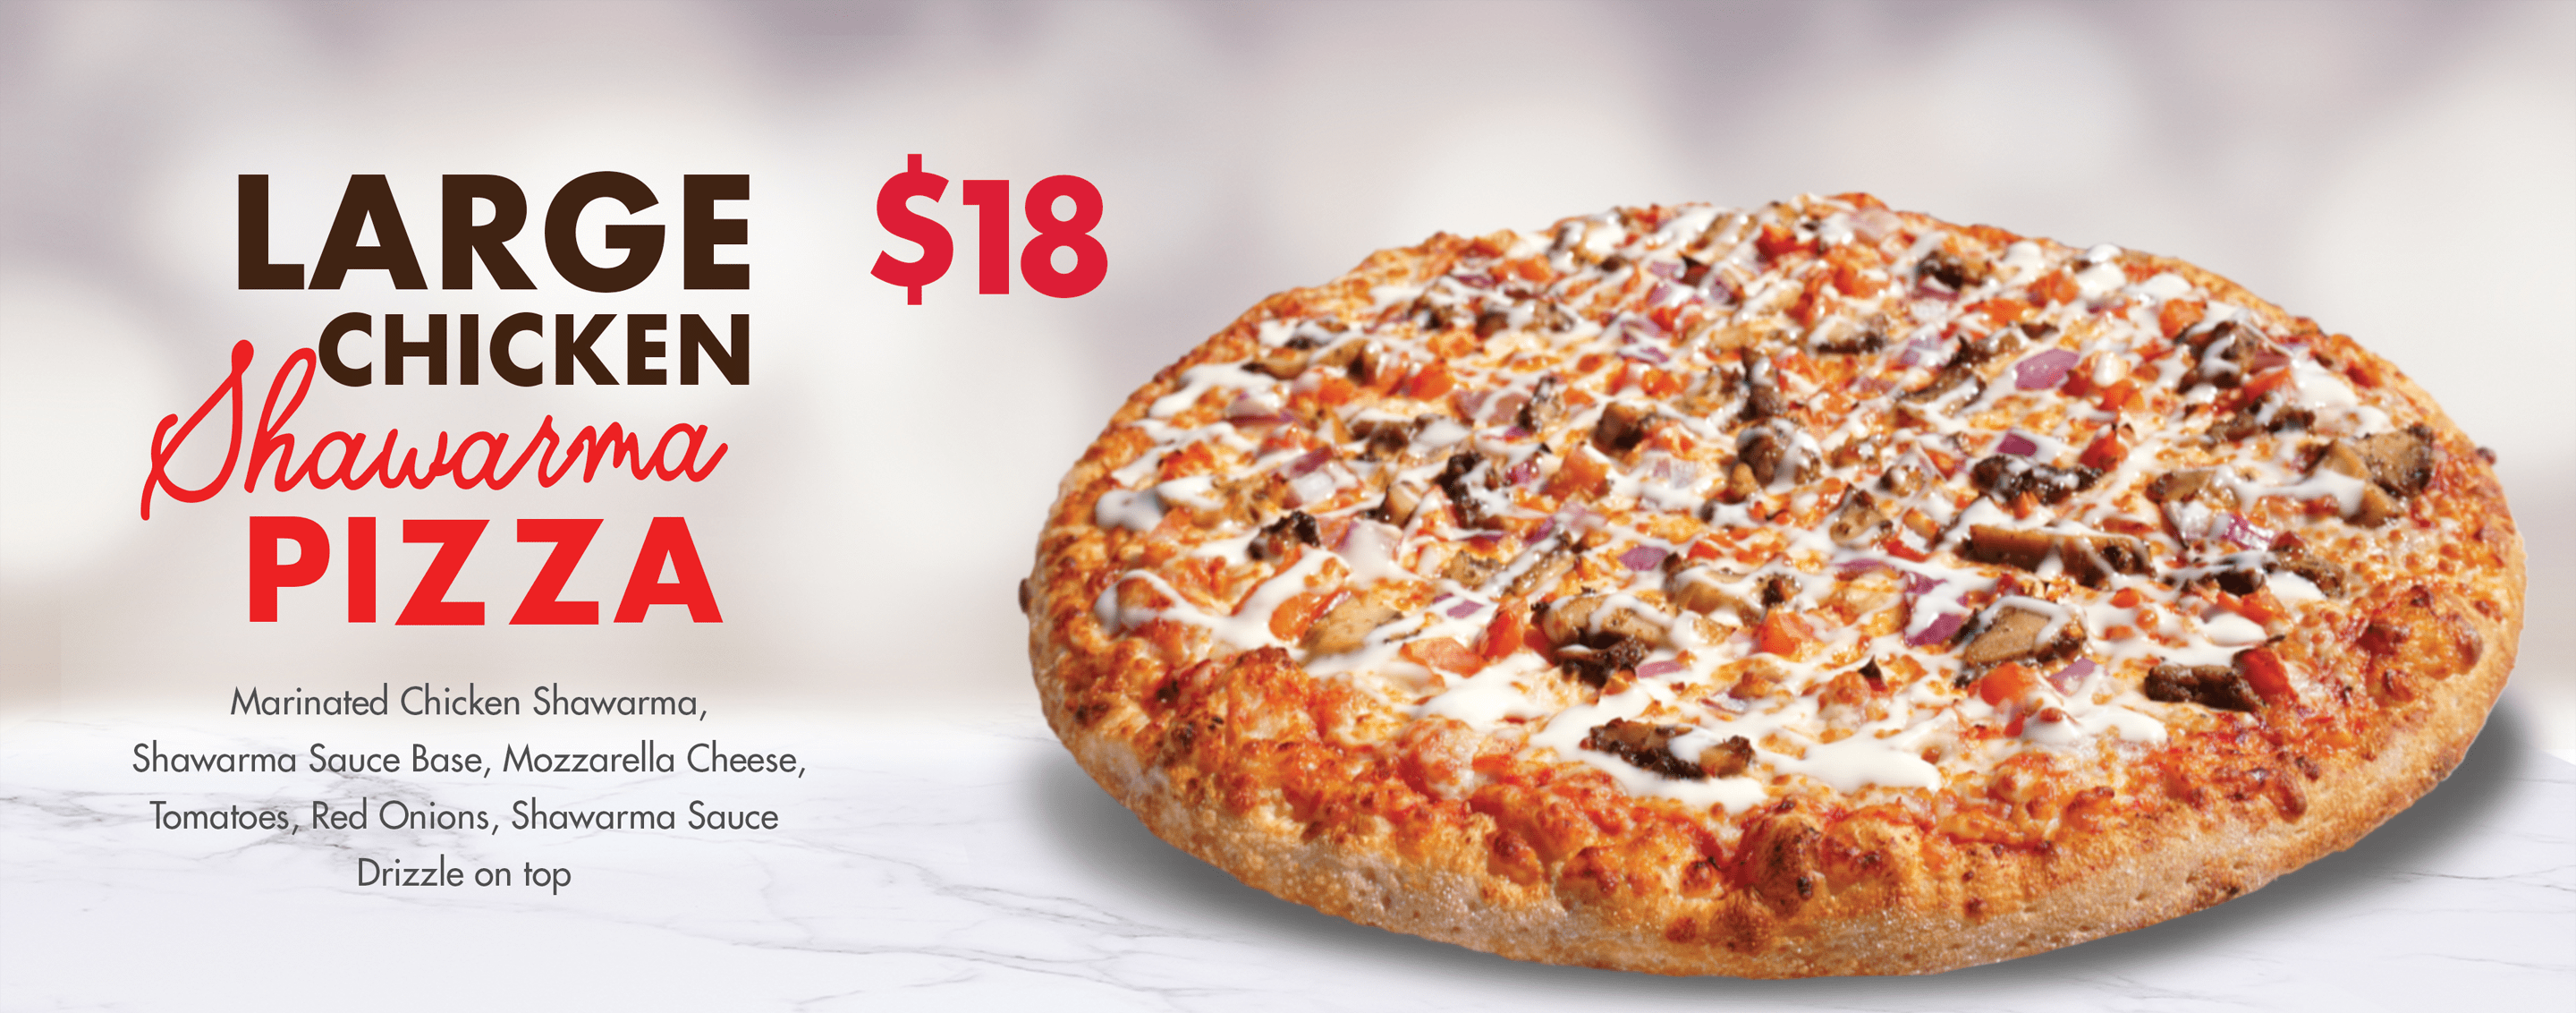 Ontario’s Best Pizza — Order Online or Call 310-4466